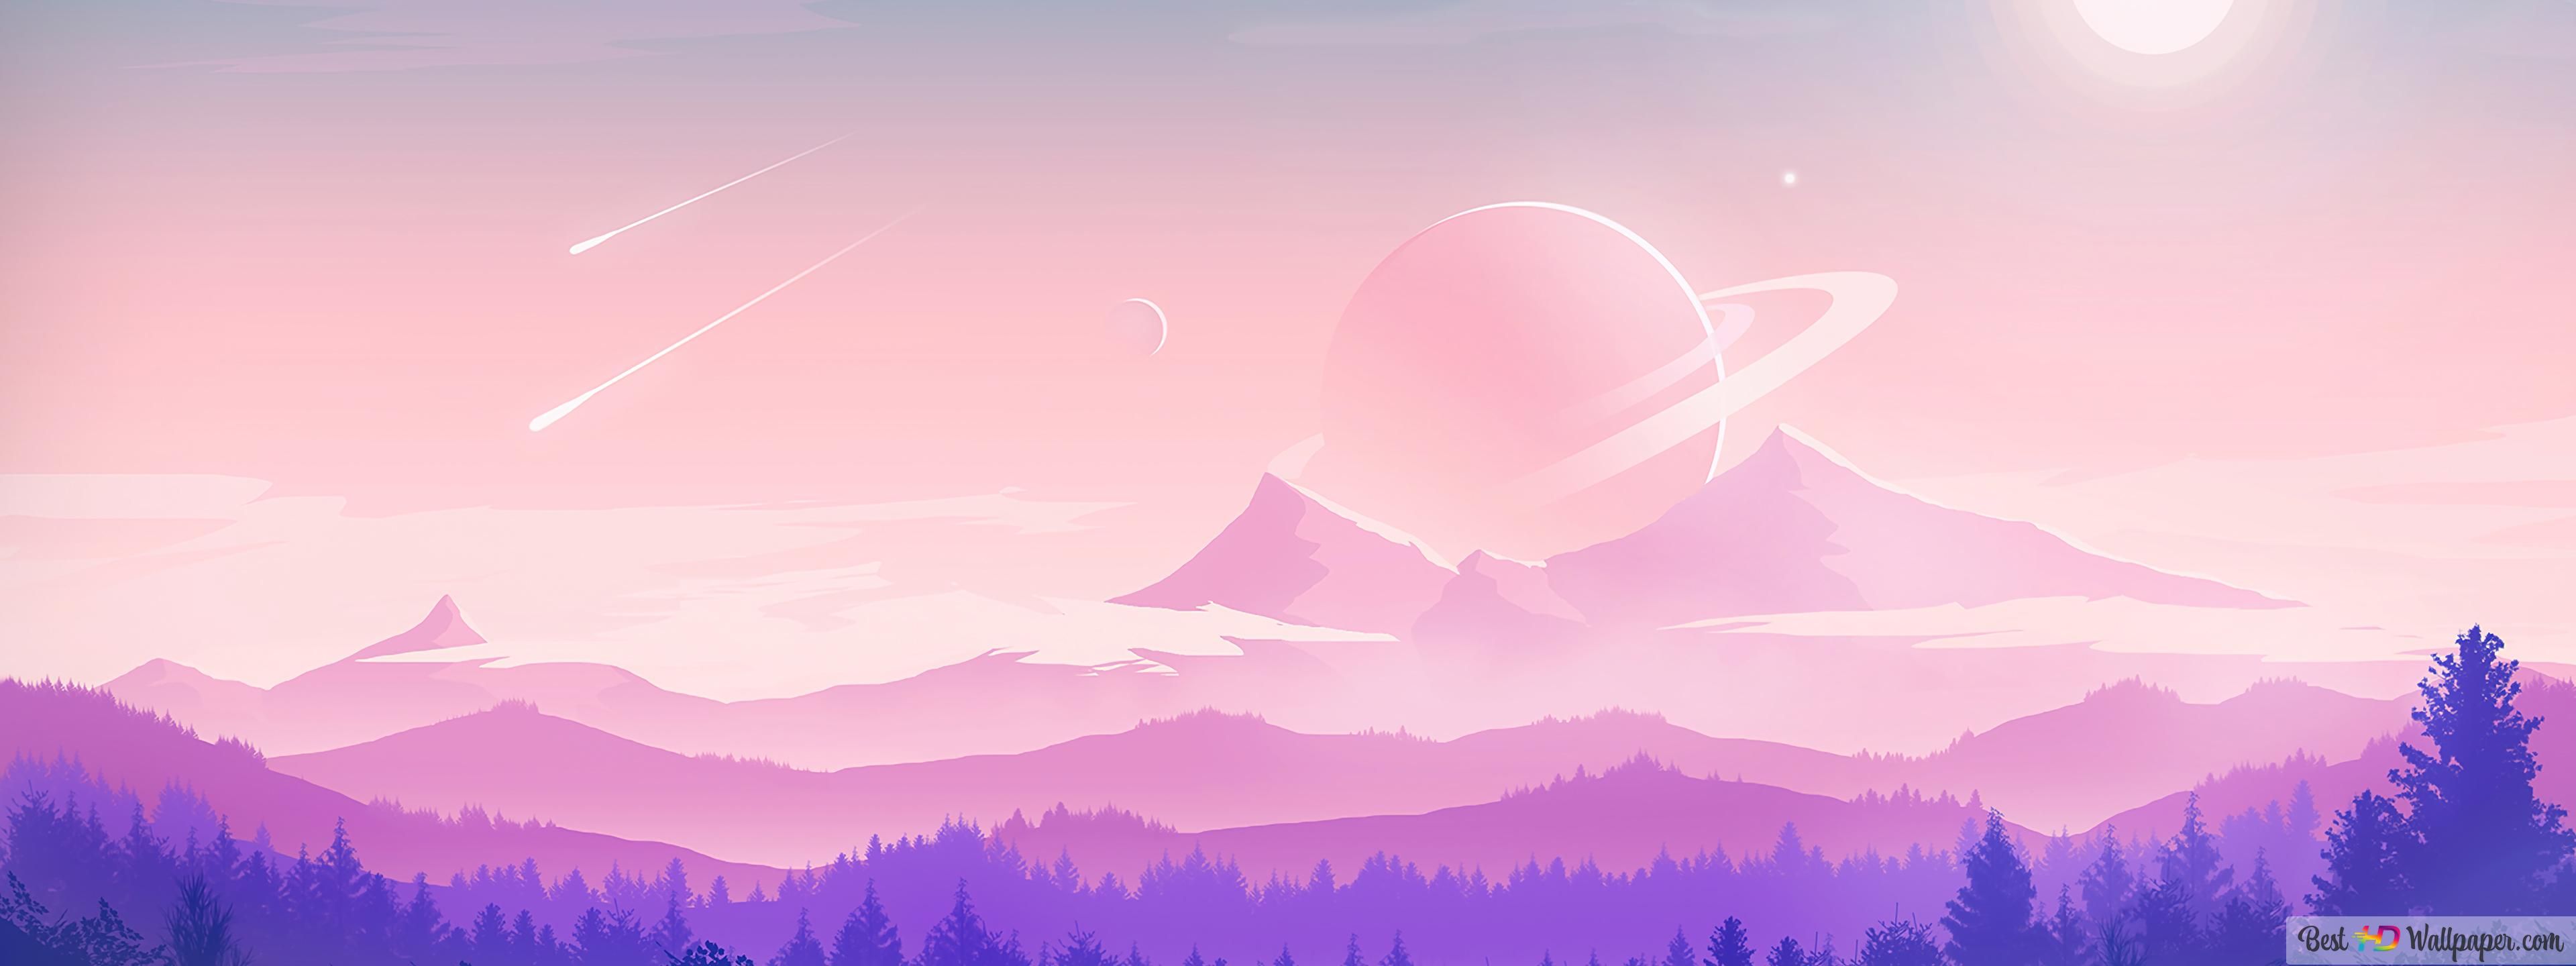 A planet and shooting stars above a mountain range - Landscape